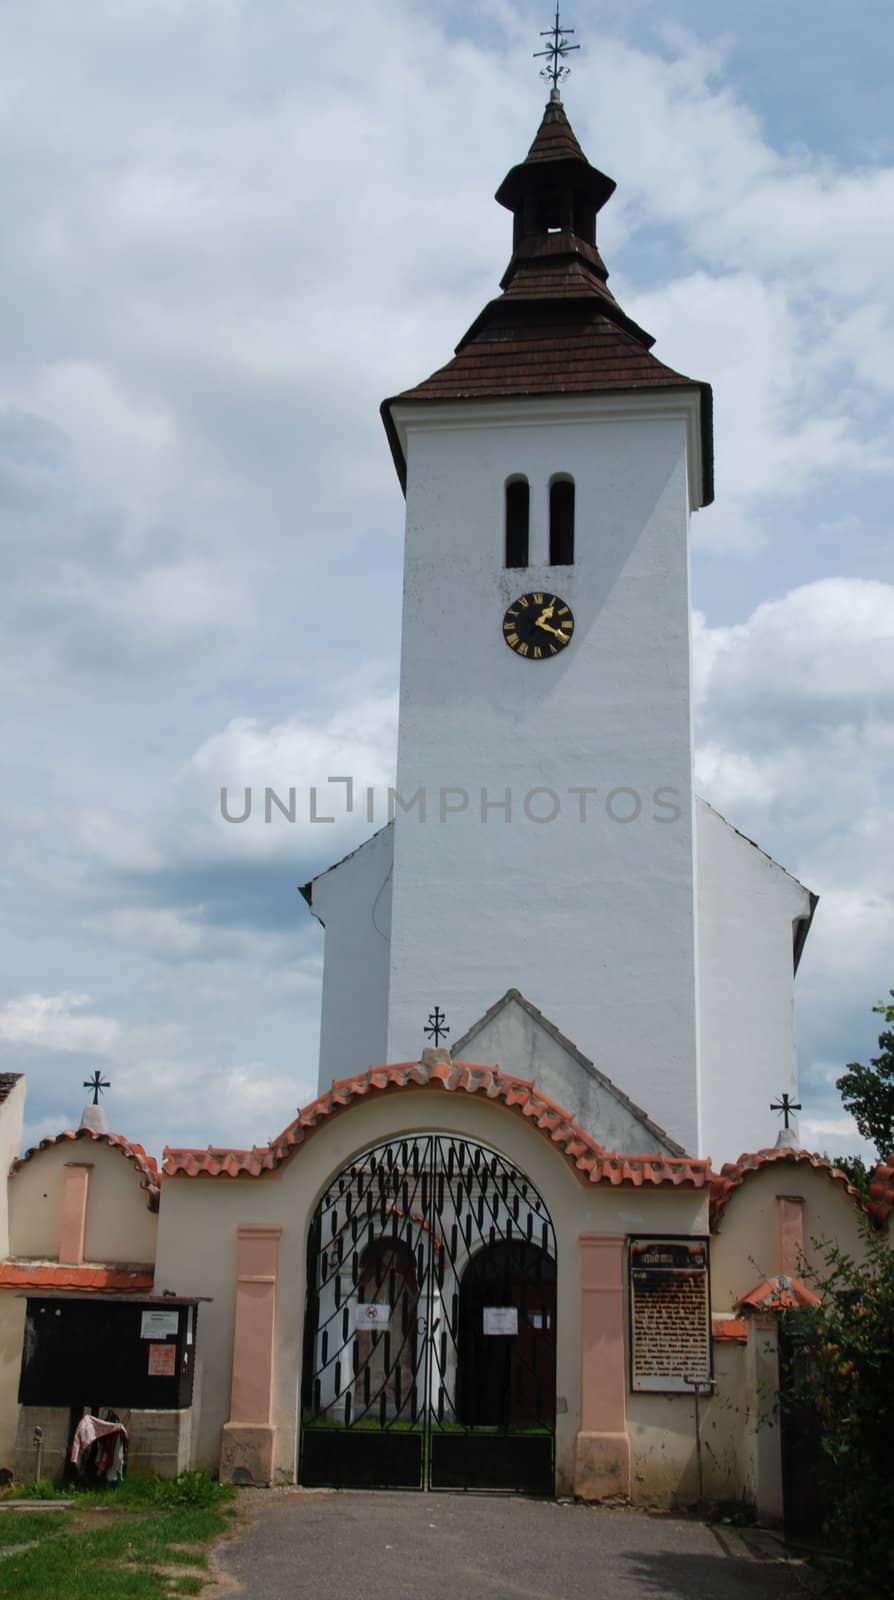 Old Czech church in the country with a graveyard